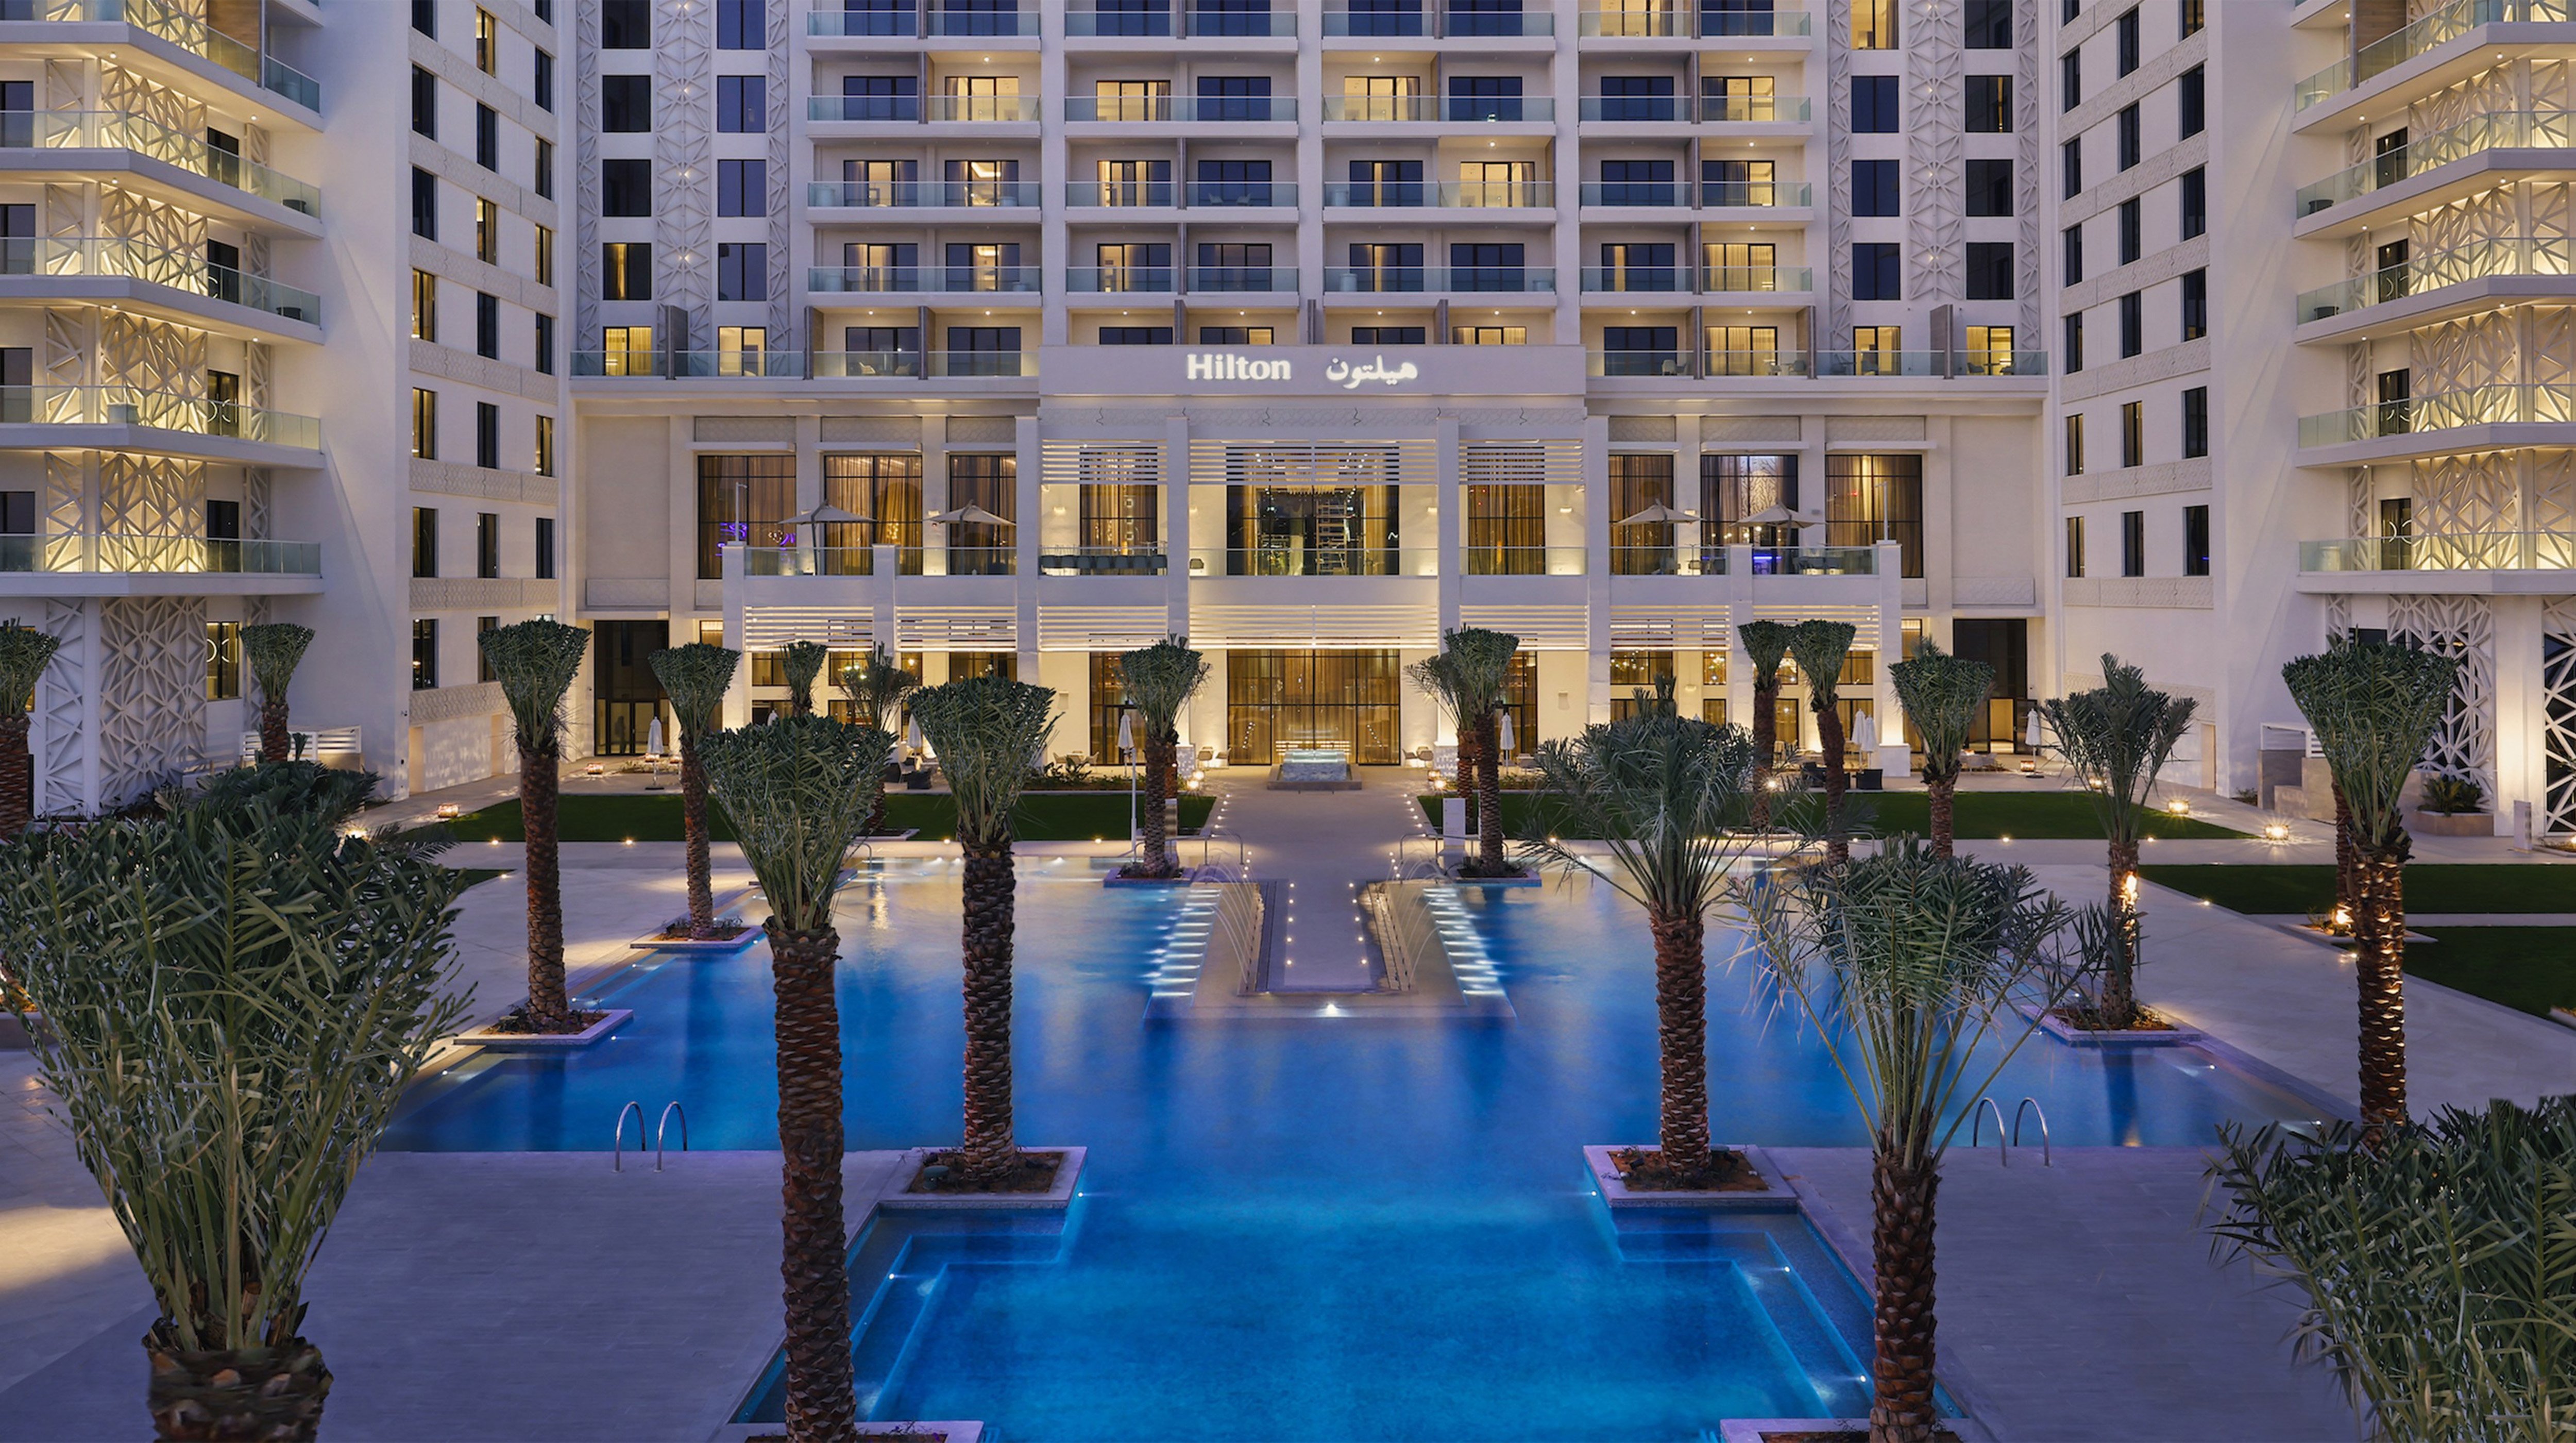 The Hilton Abu Dhabi and its impressive swimming pool in Yas Bay Waterfront